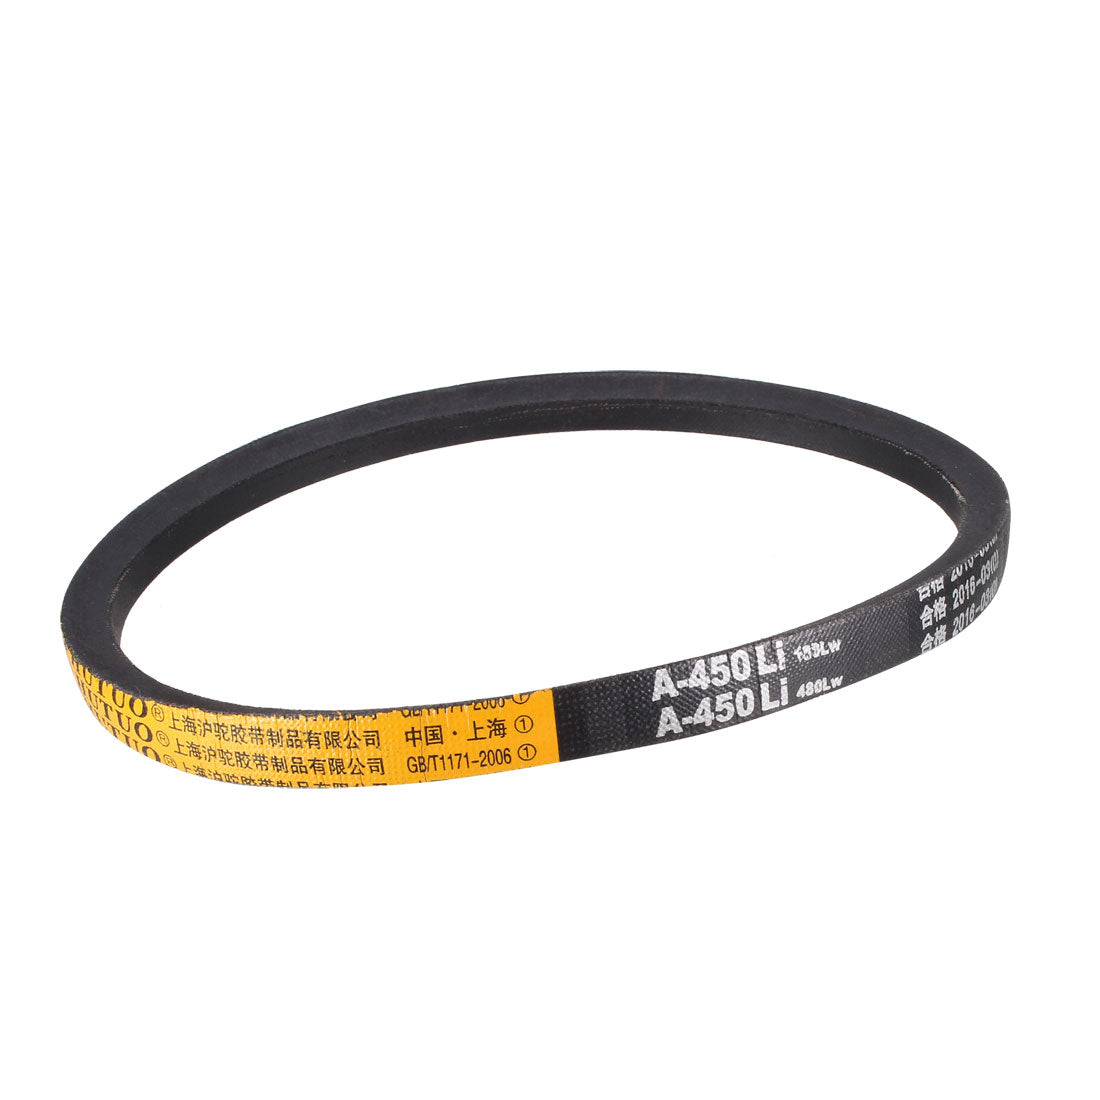 Uxcell Uxcell A940/A37 V-Belts 37" Inner Girth, A-Section Rubber Drive Belt